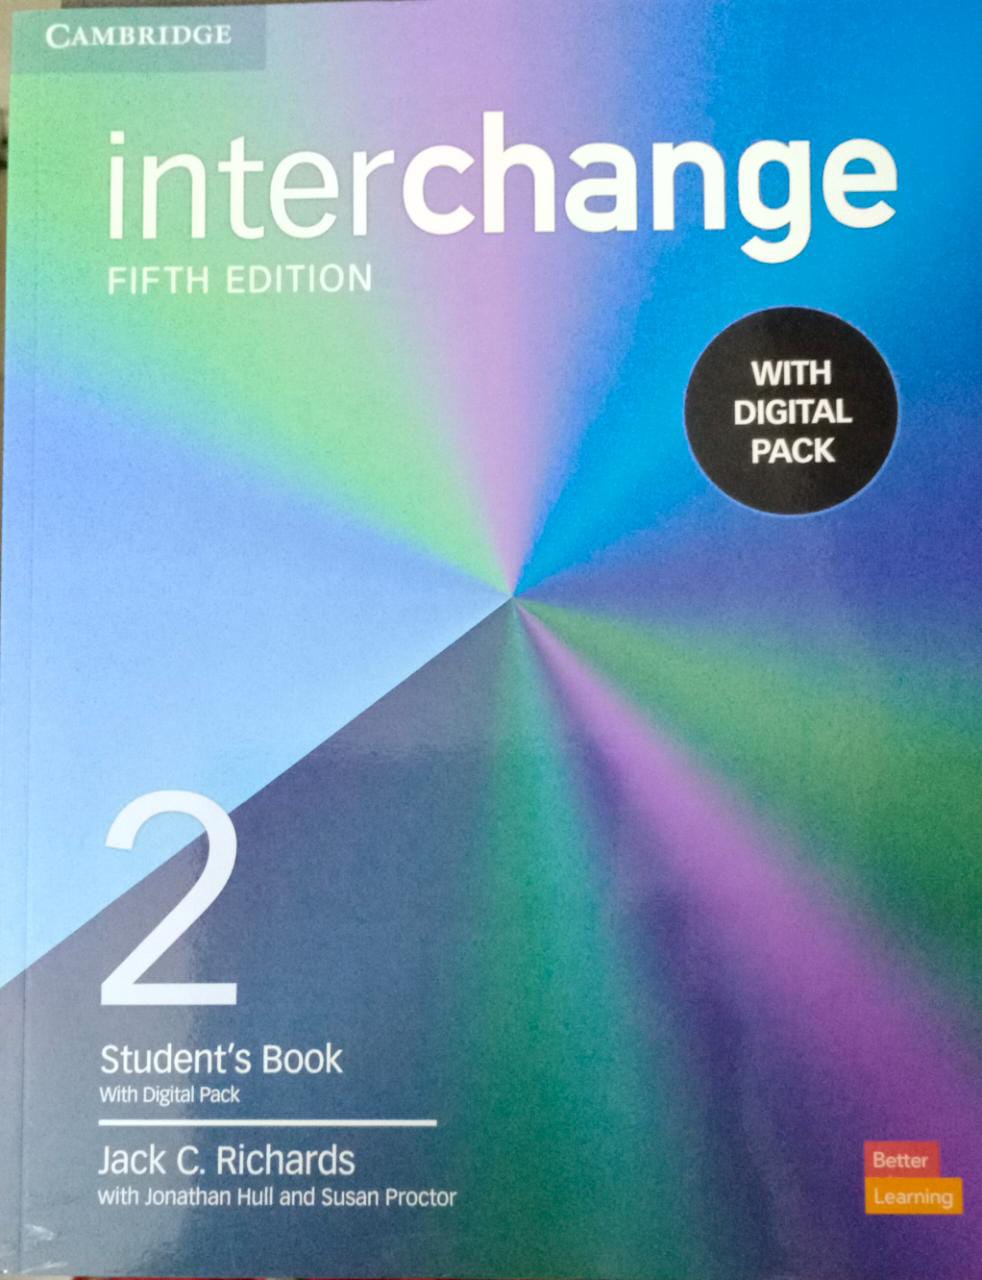 pack　books99.　Level　Interchange　Book　edition–　fifth　Student's　Digital　with　in